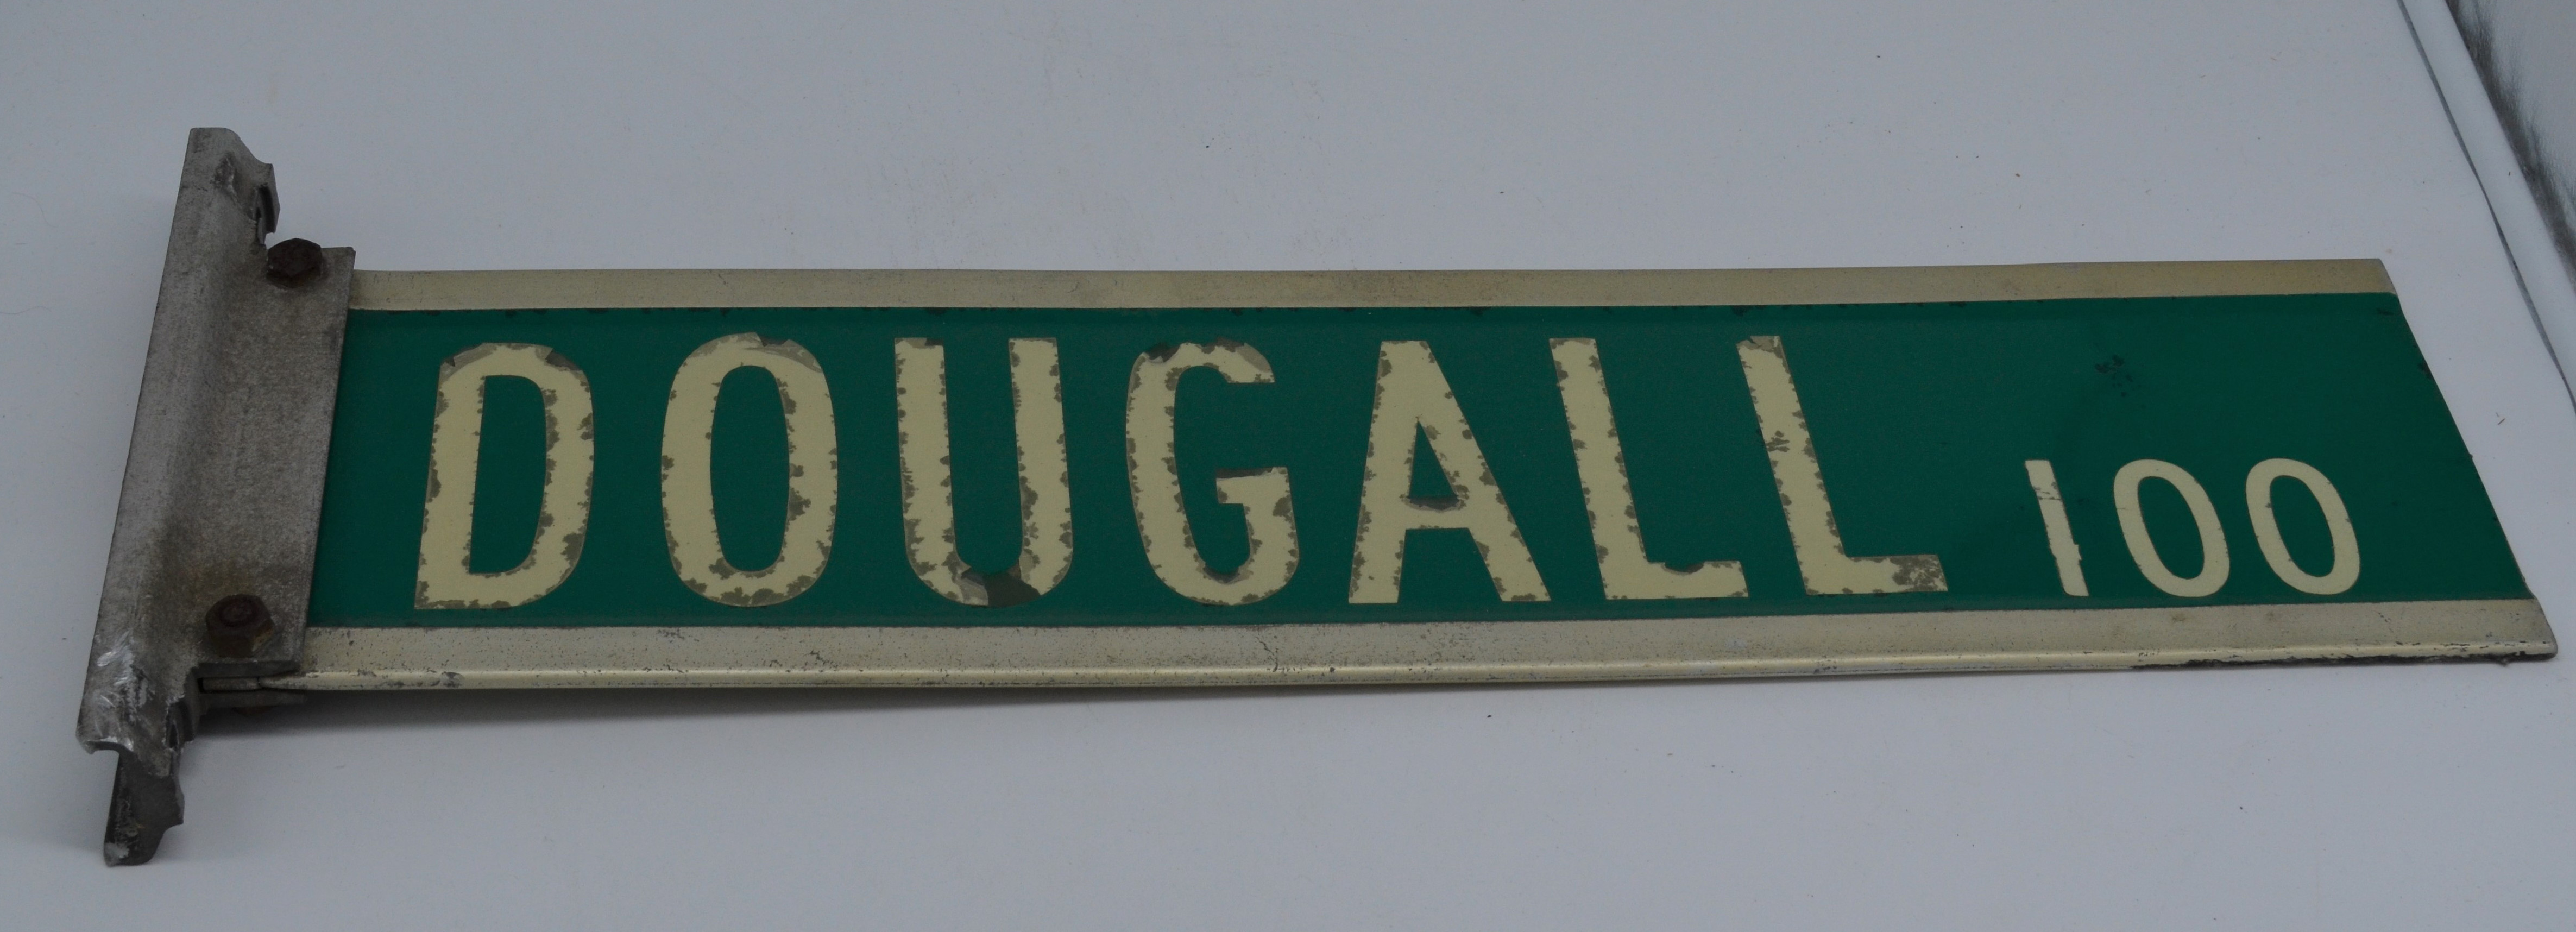 Dougall%20street%20sign